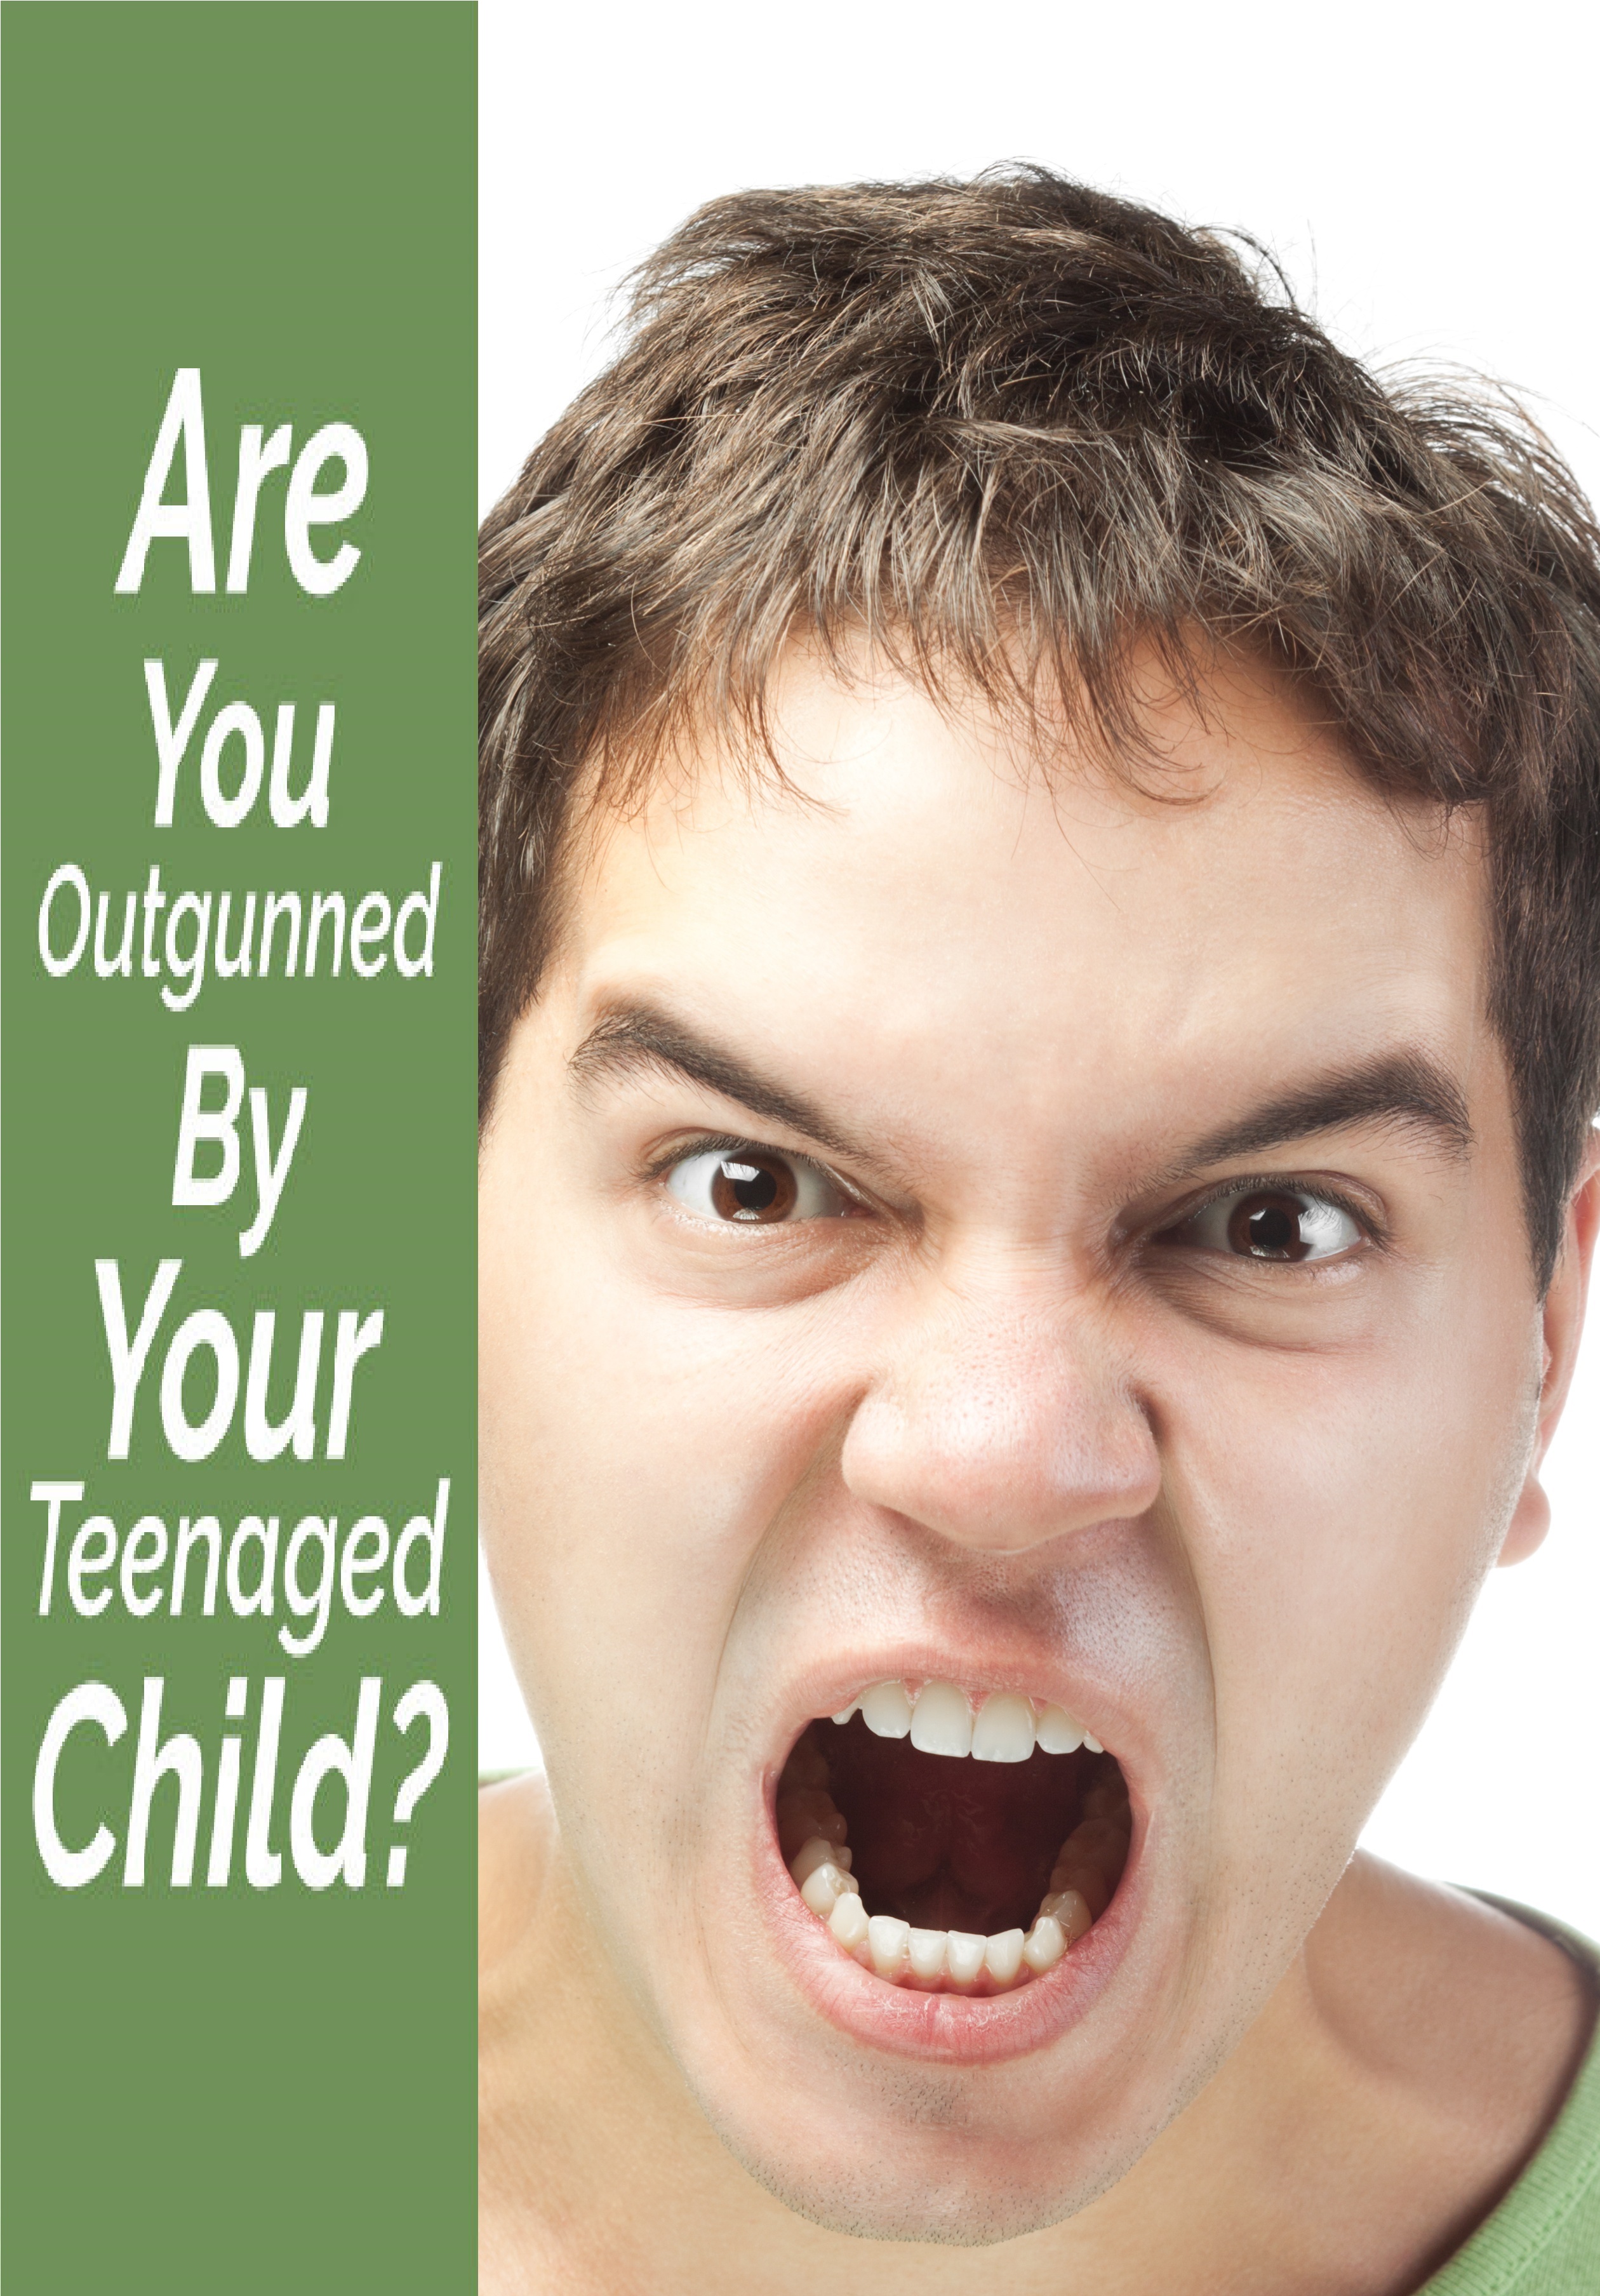 Are you outgunned by your teenaged child?